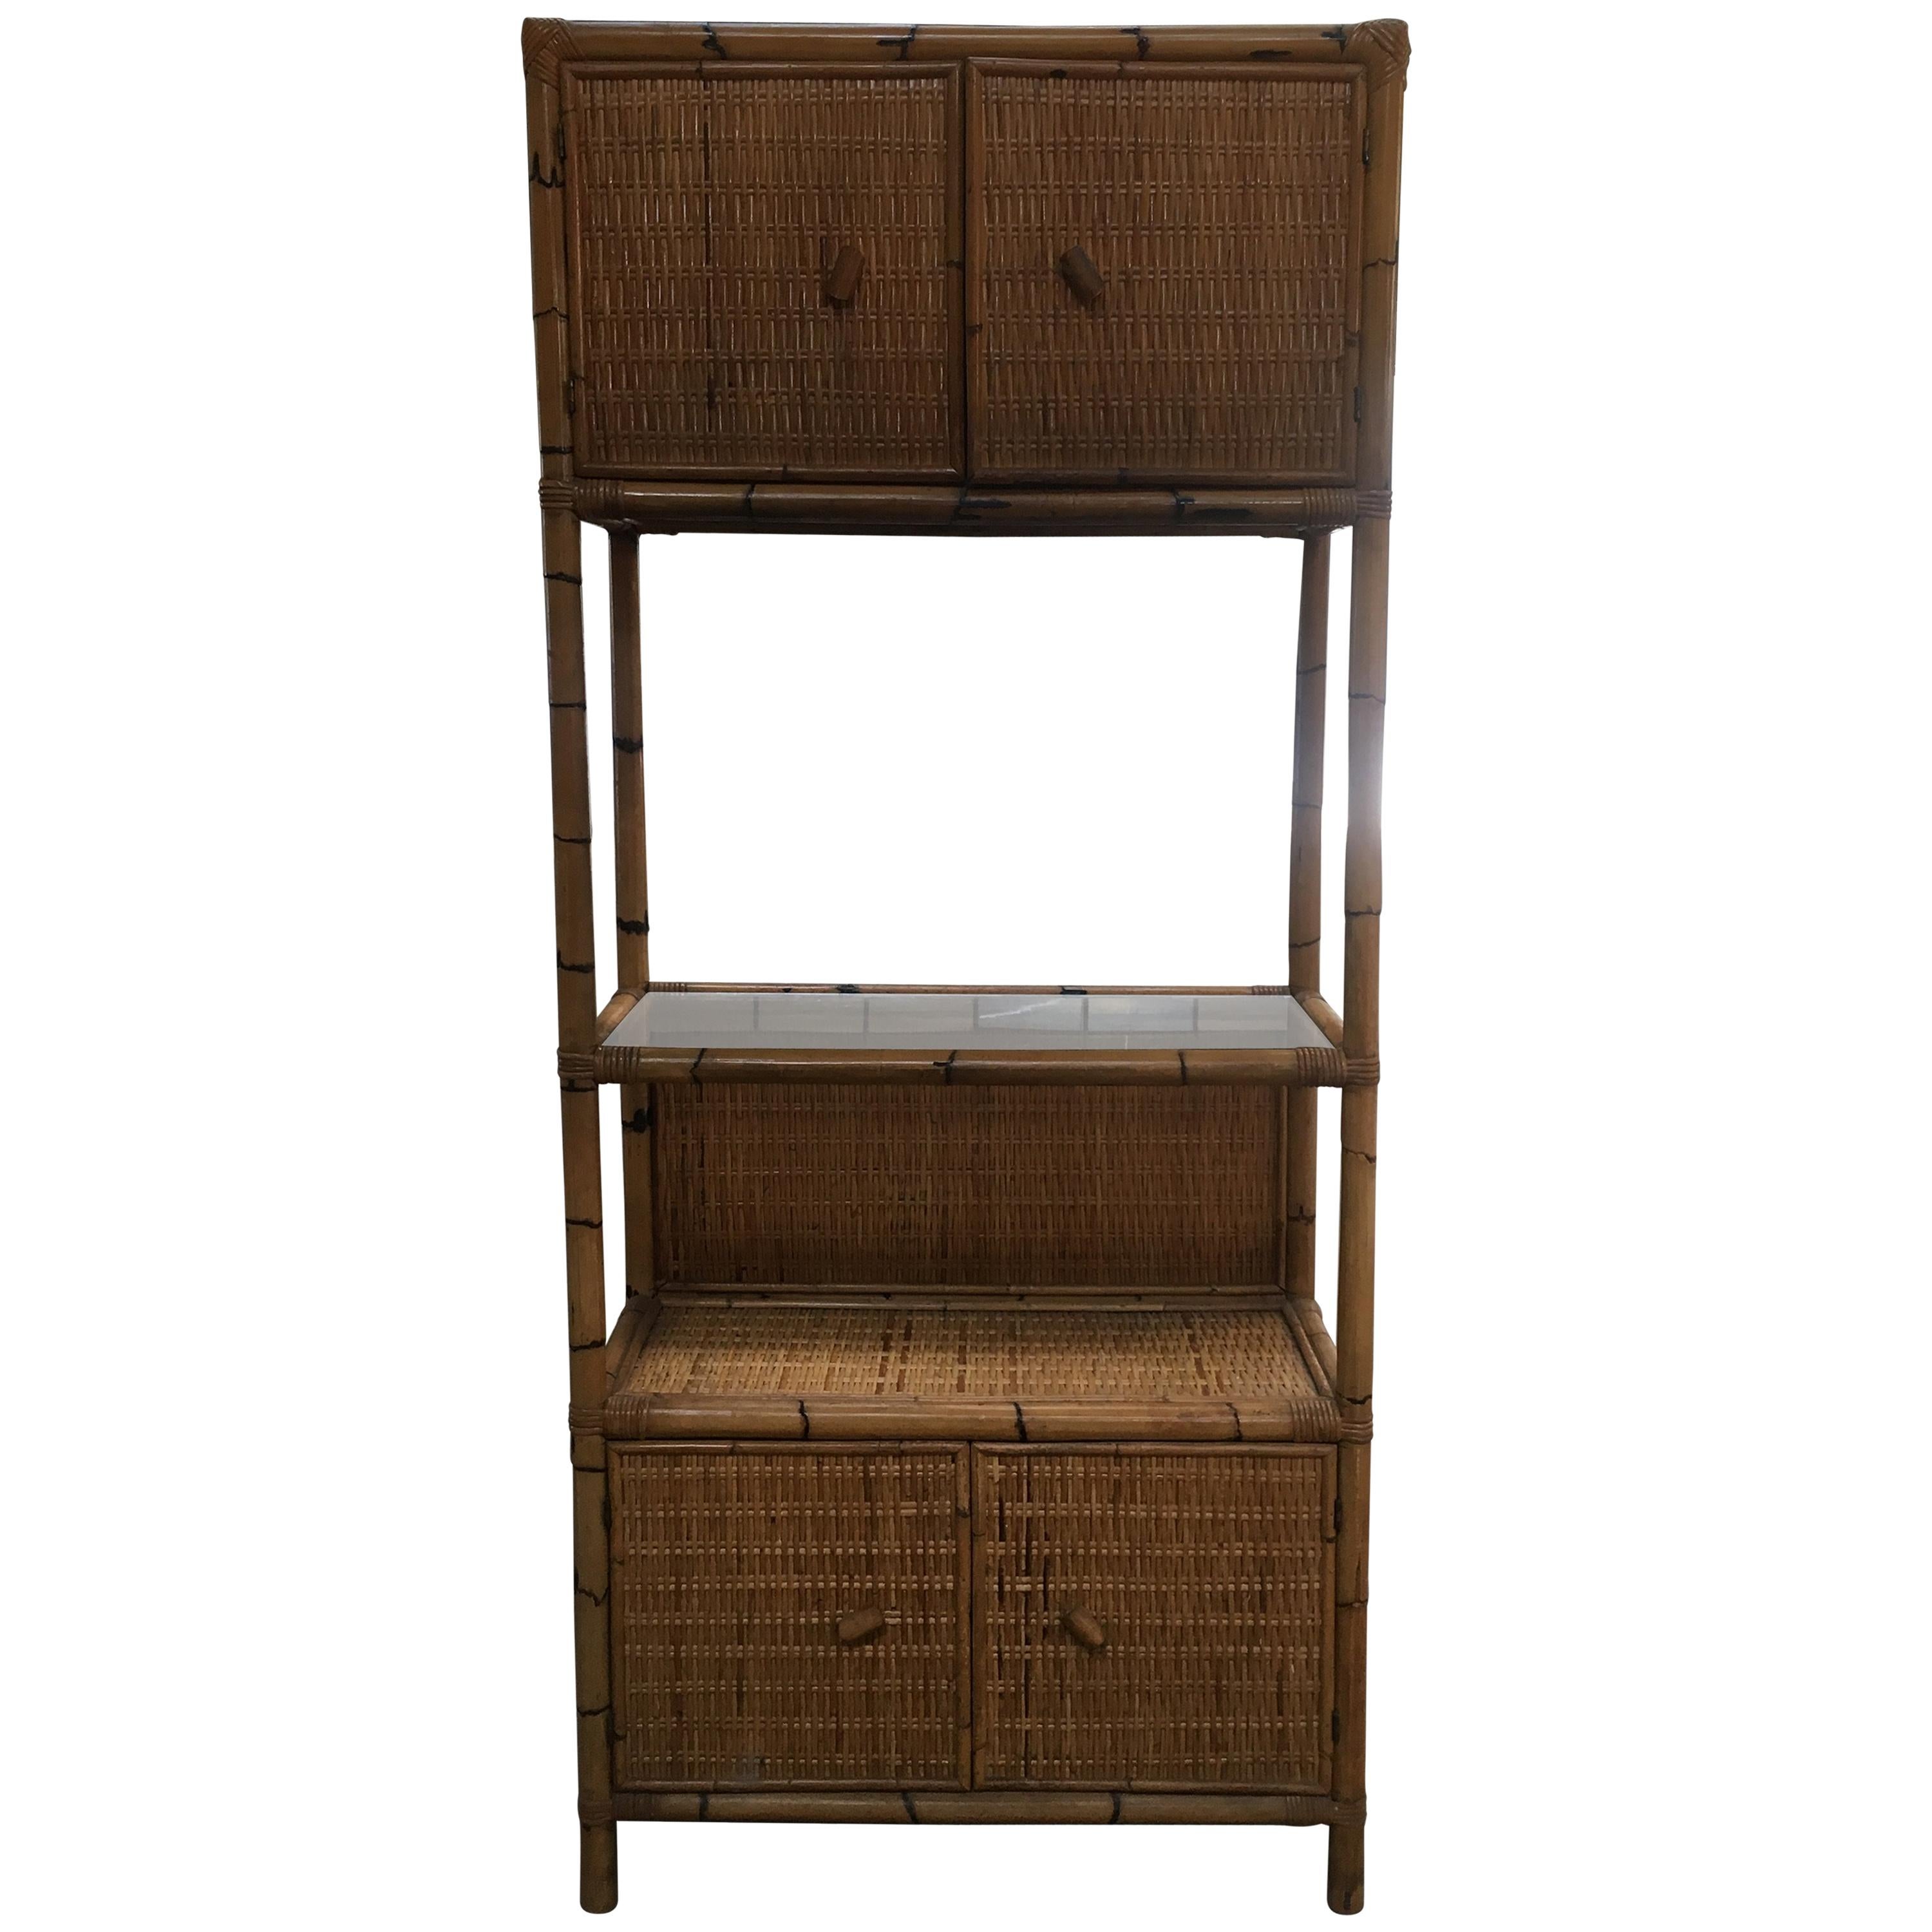 Mid-Century Modern Italian Bamboo Etagere with Shutters and Shelf from 1970s